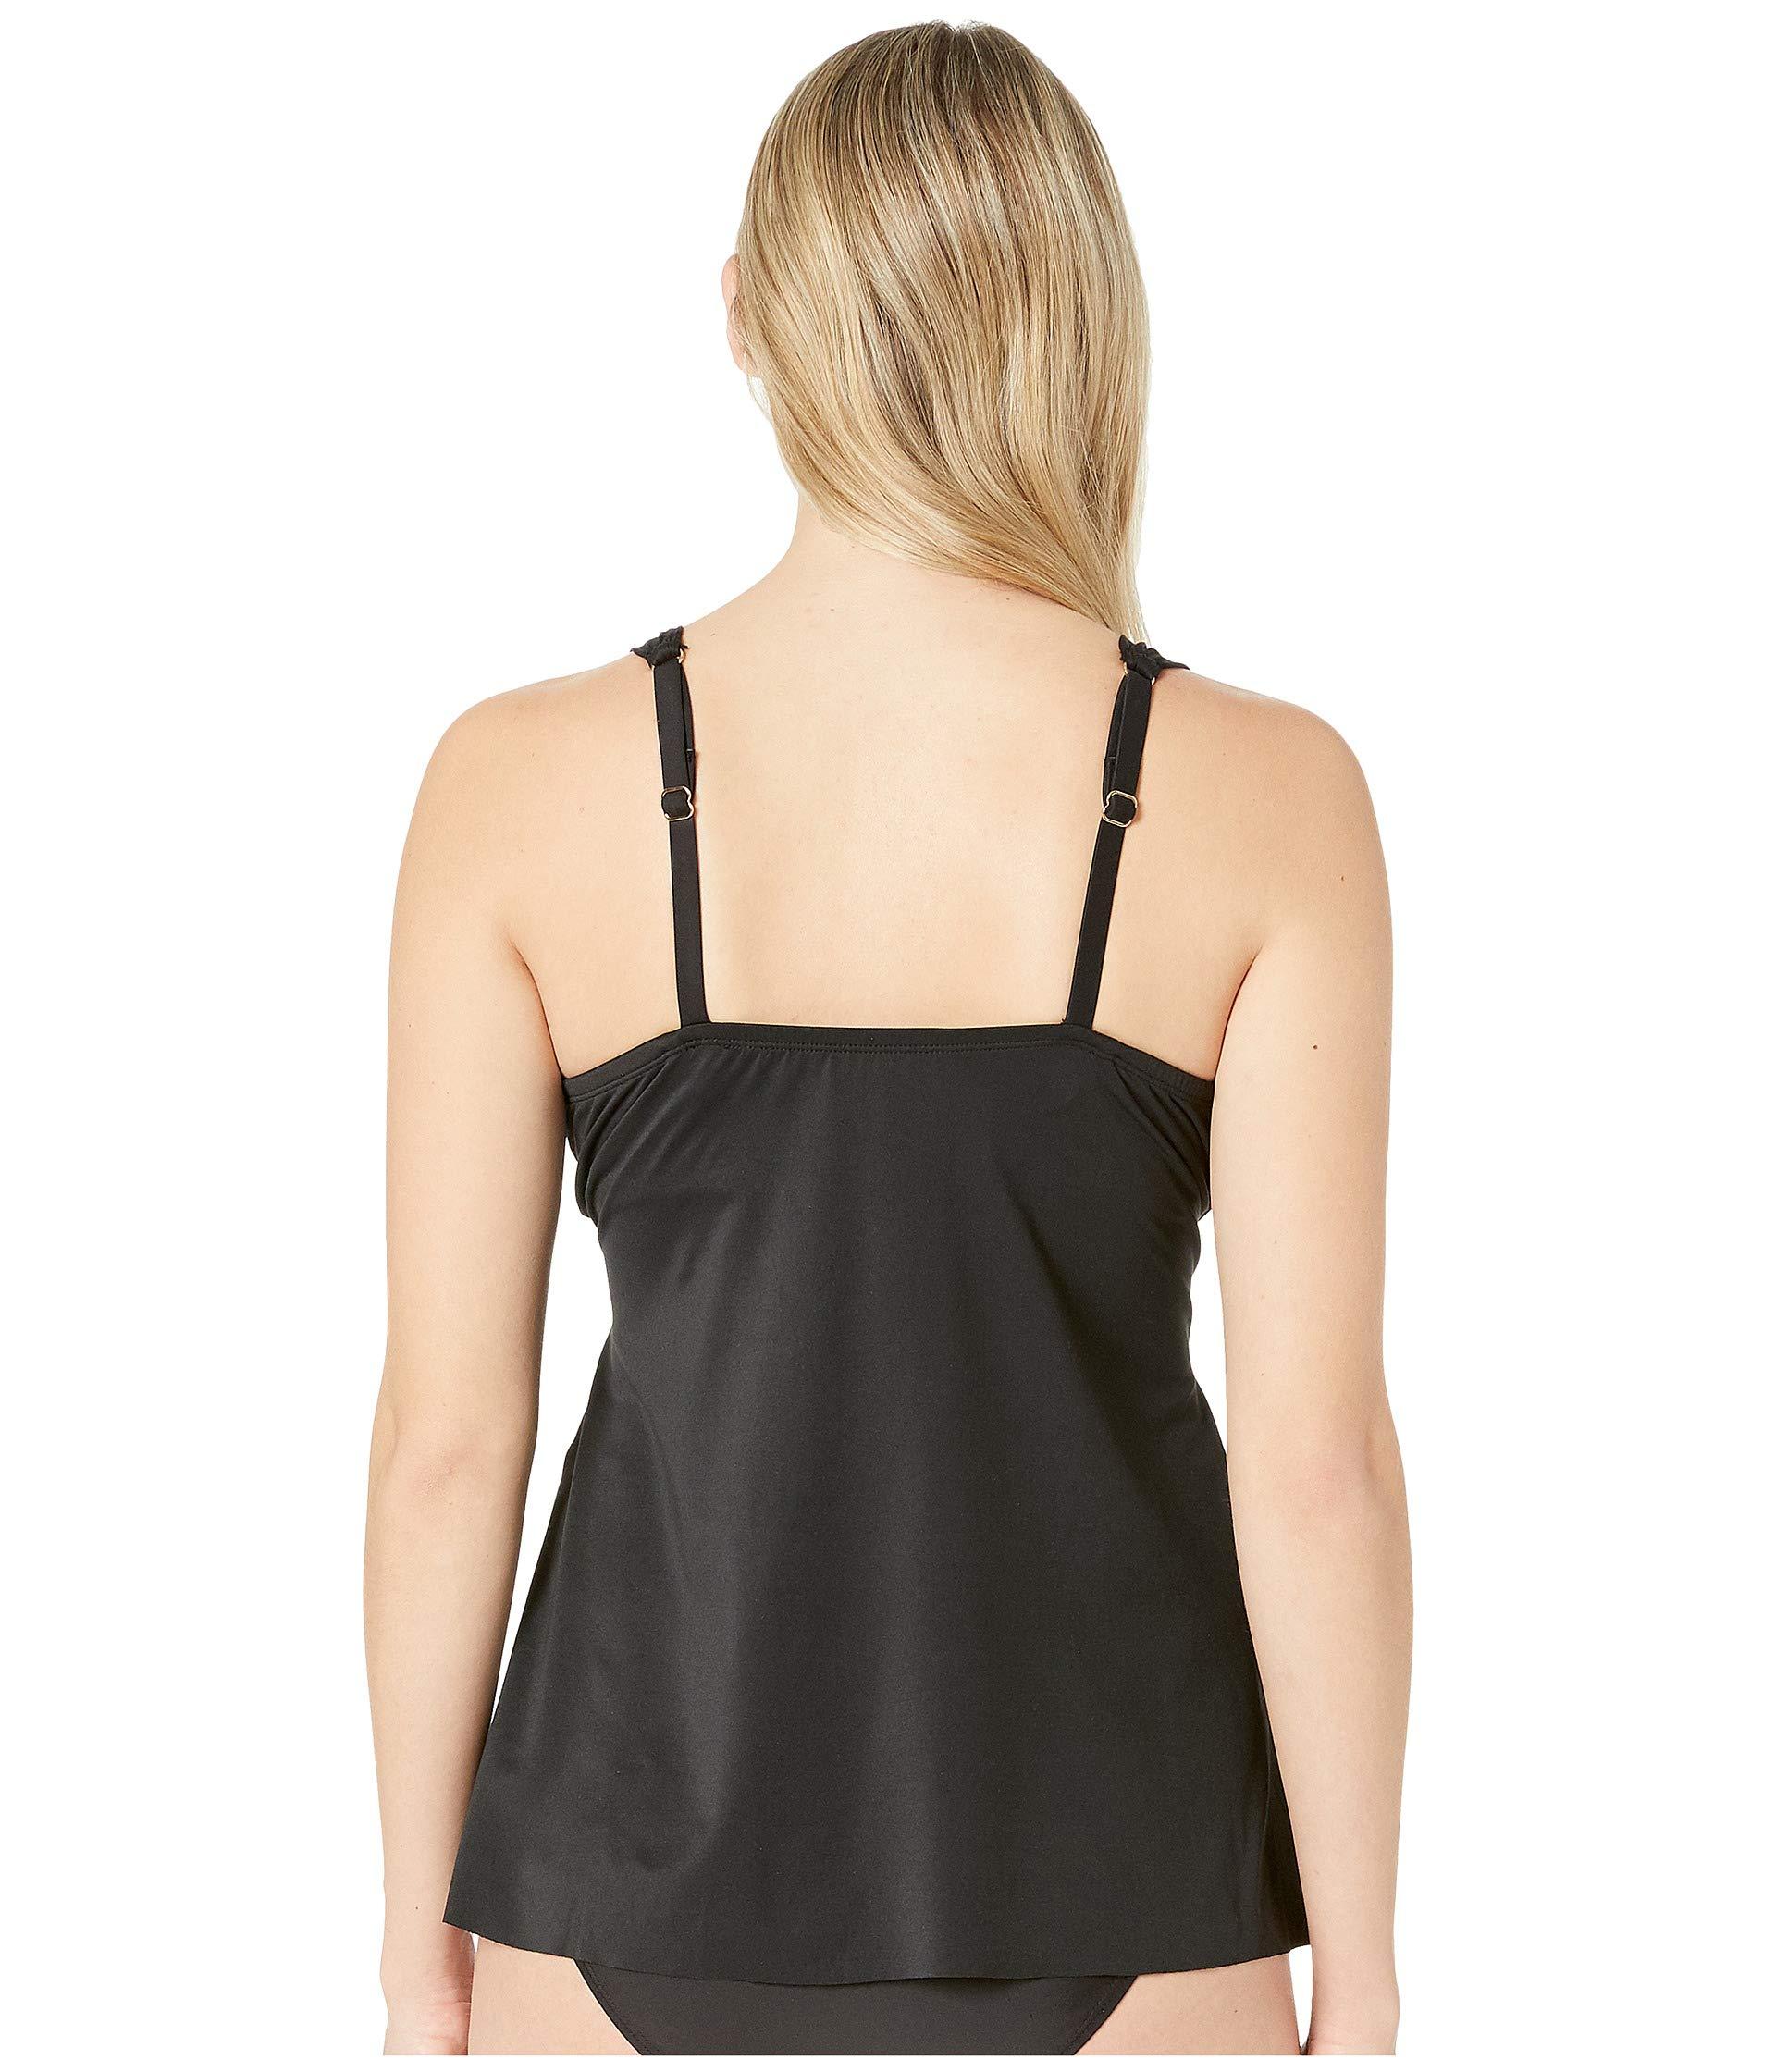 Lyst - Miraclesuit D-ddd Cup Solid Black Plunge Tankini Top (black ...